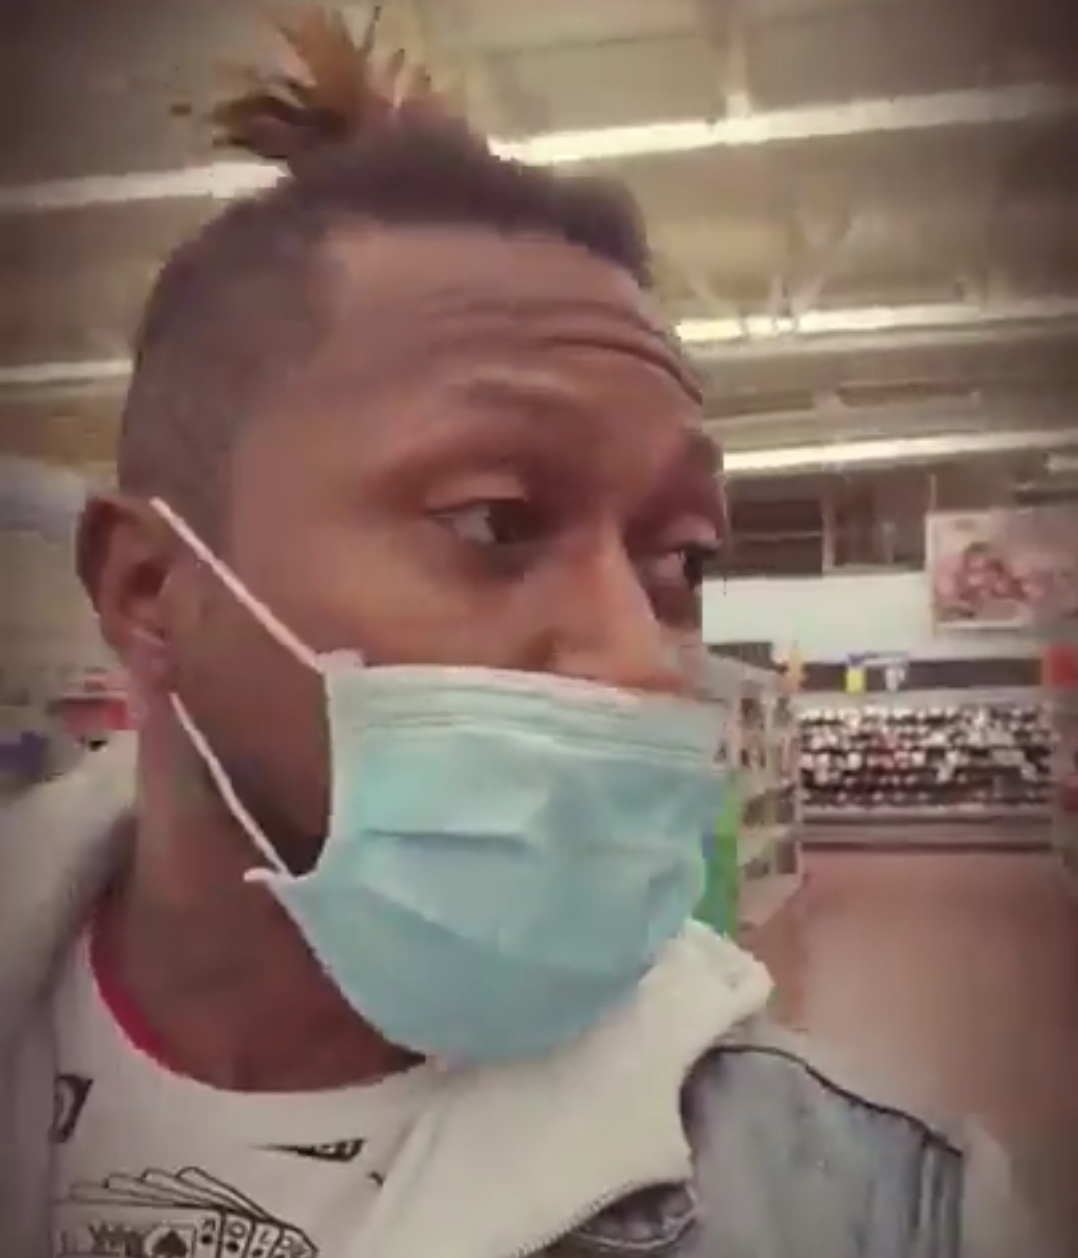 Two Black Men Kicked Out of Walmart for Wearing Surgical Mask